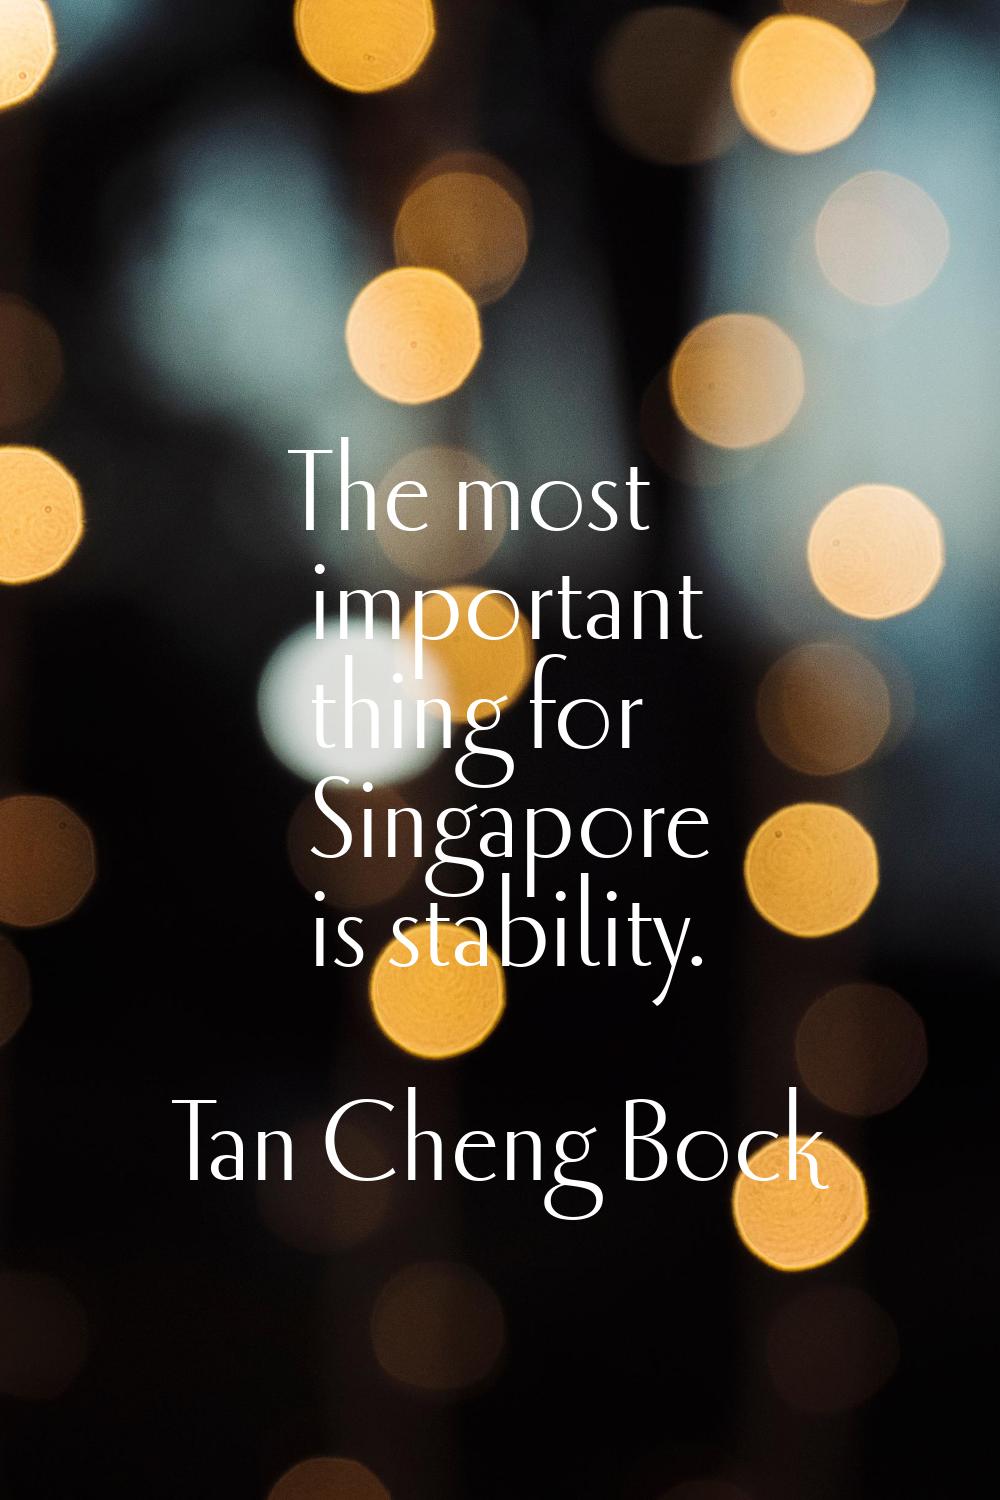 The most important thing for Singapore is stability.